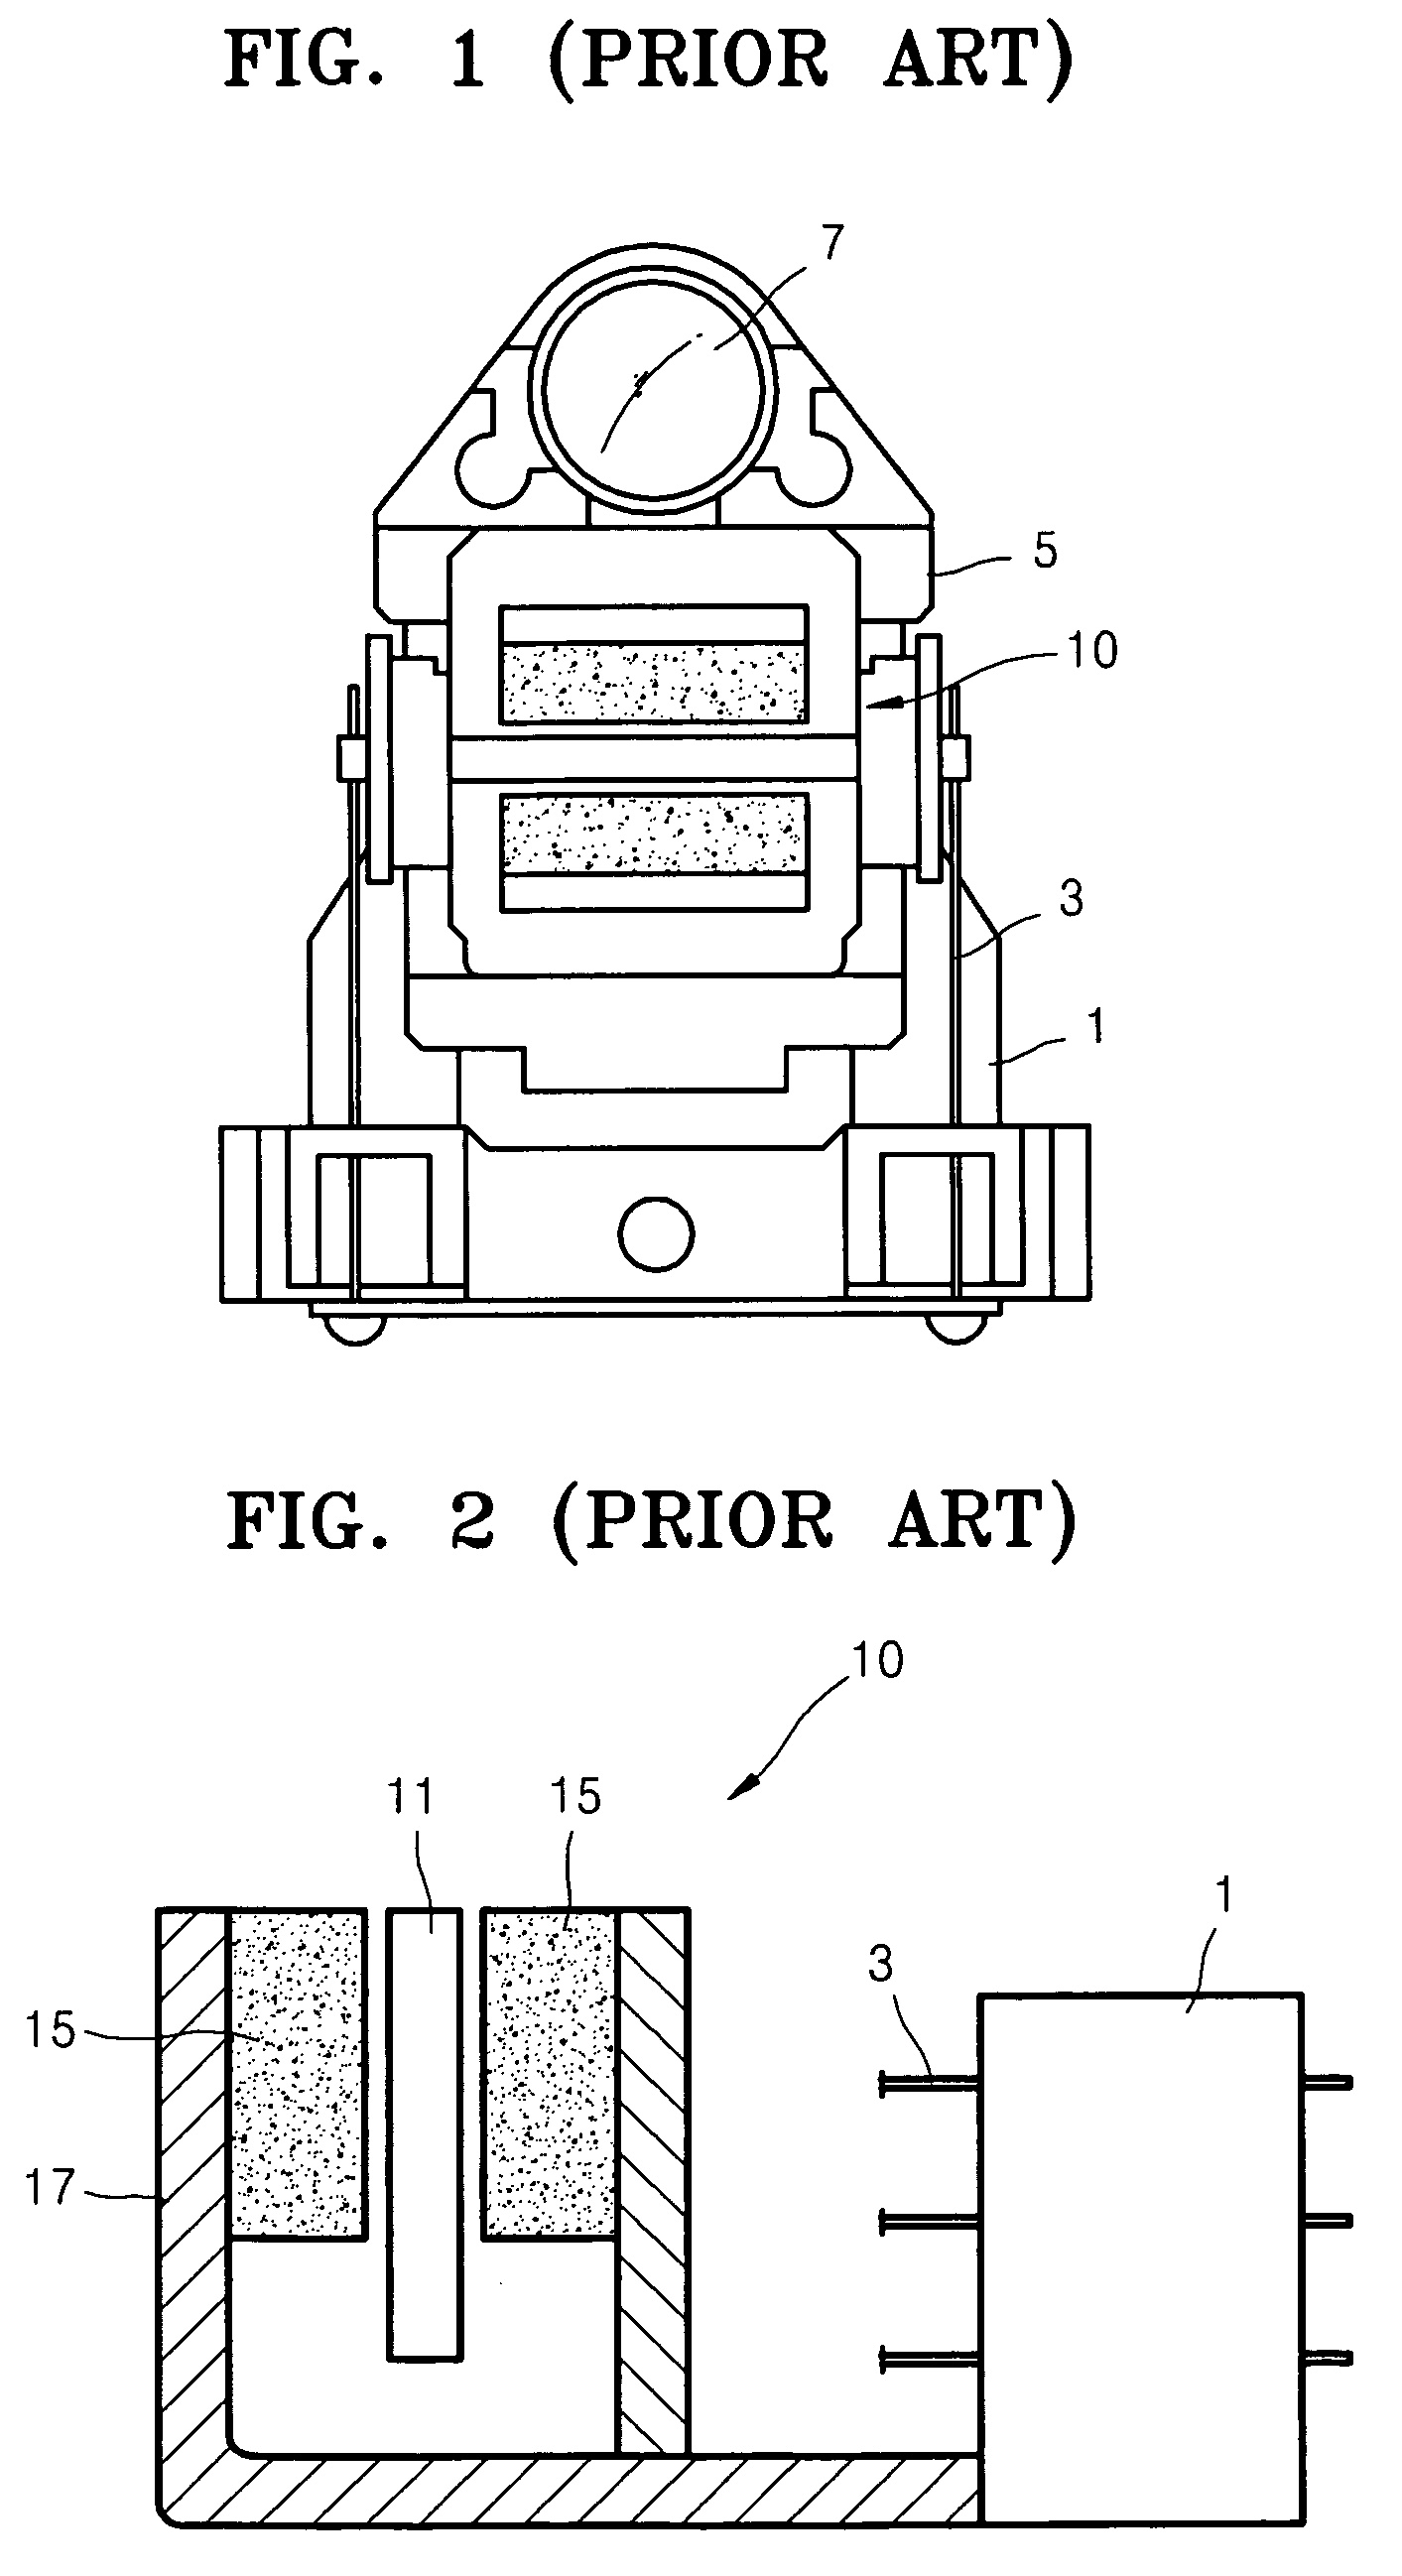 Optical pickup actuator for driving an objective lens